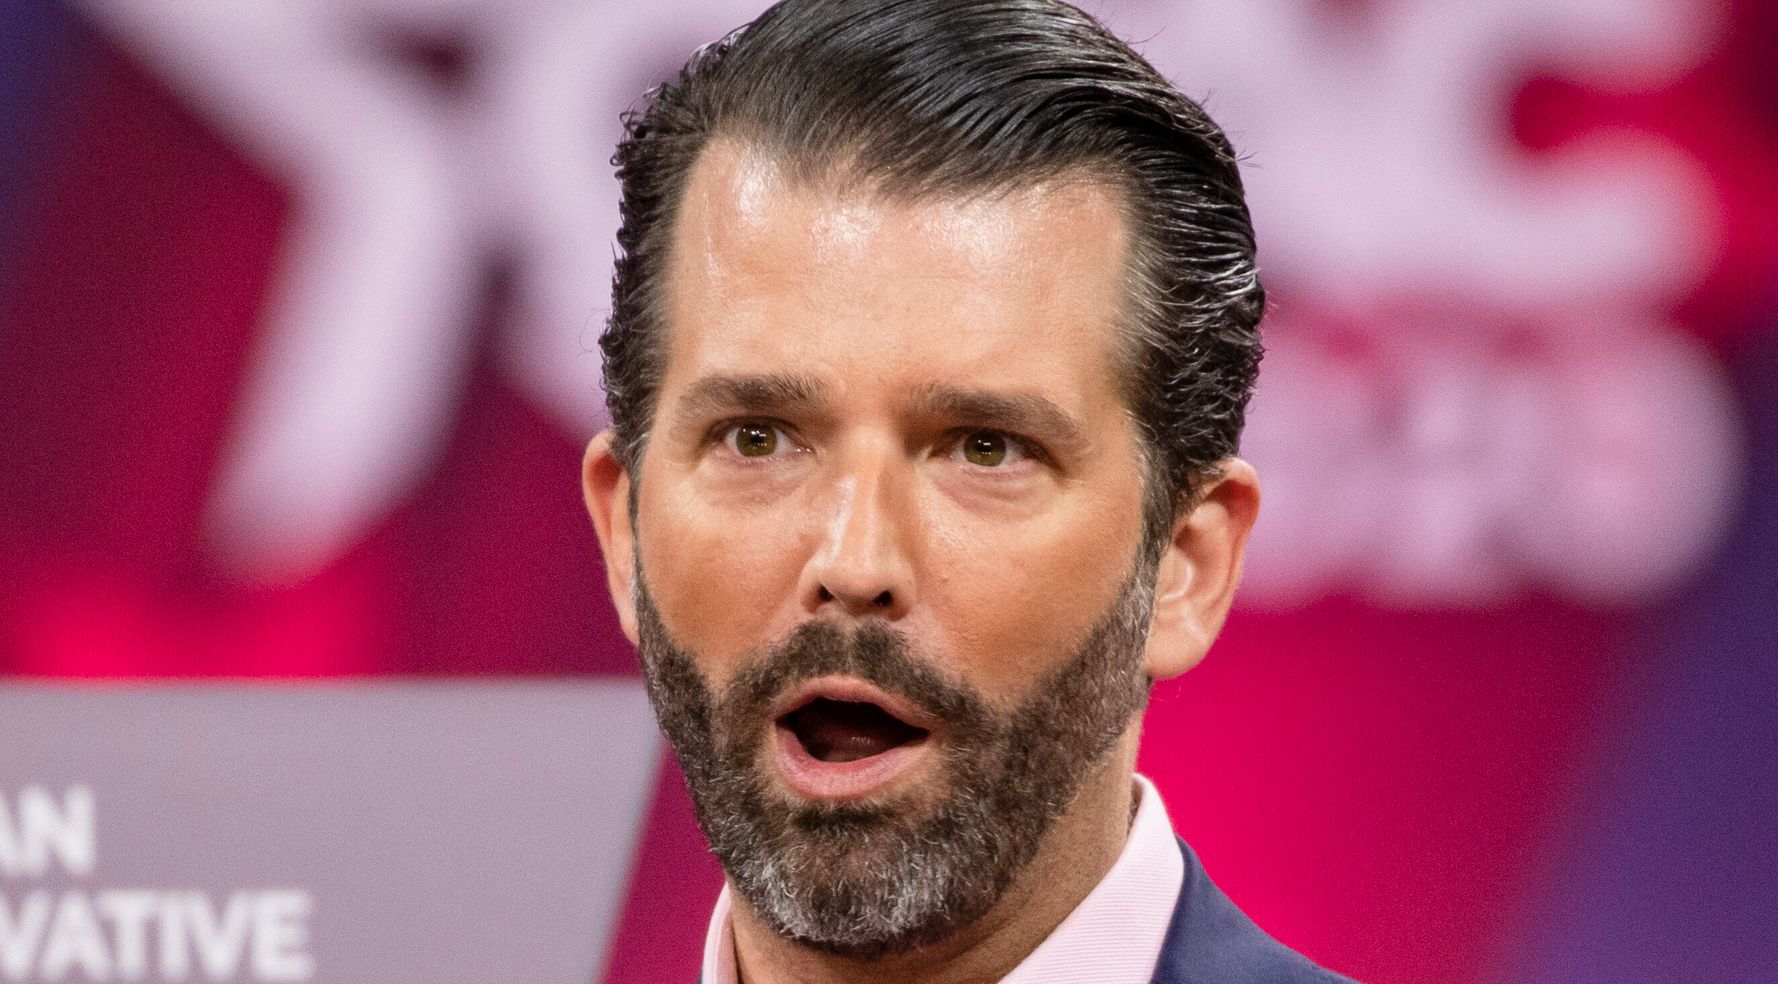 Donald Trump Jr. Gets The Bird Over July 4 Meme Of His Dad